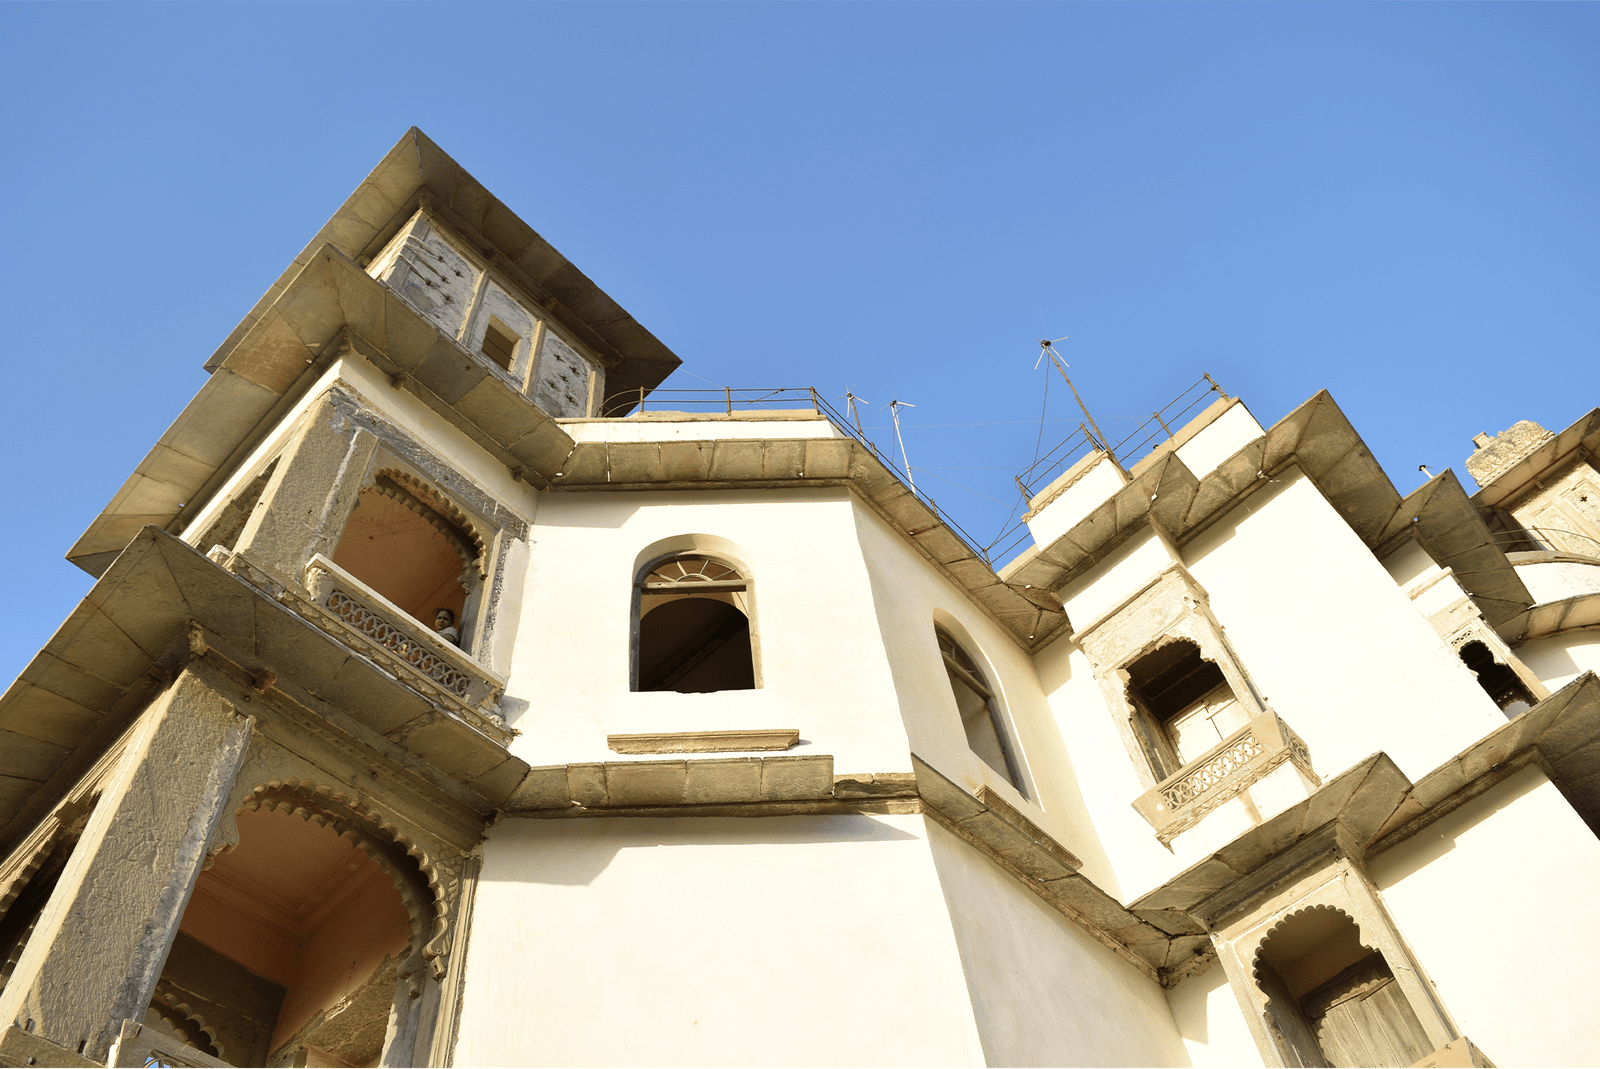 9 Nearby Places to visit in Udaipur